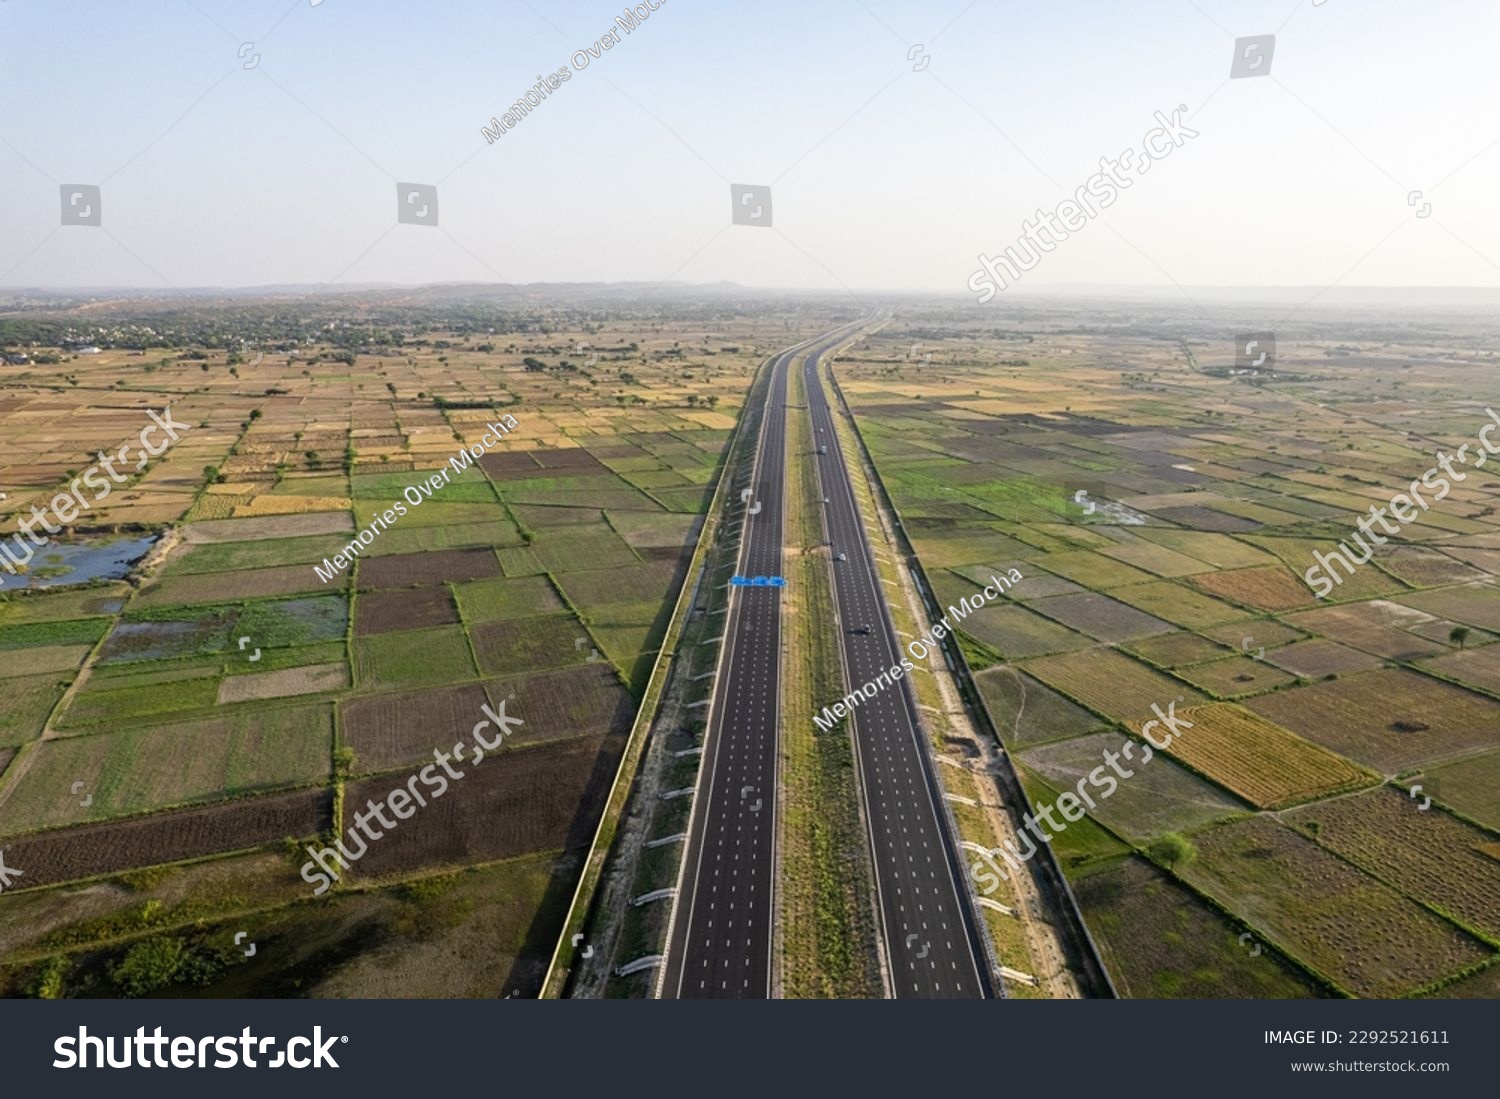 orbit aerial drone shot of new delhi mumbai jaipur express elevated highway showing six lane road with green feilds with rectangular farms on the sides #2292521611